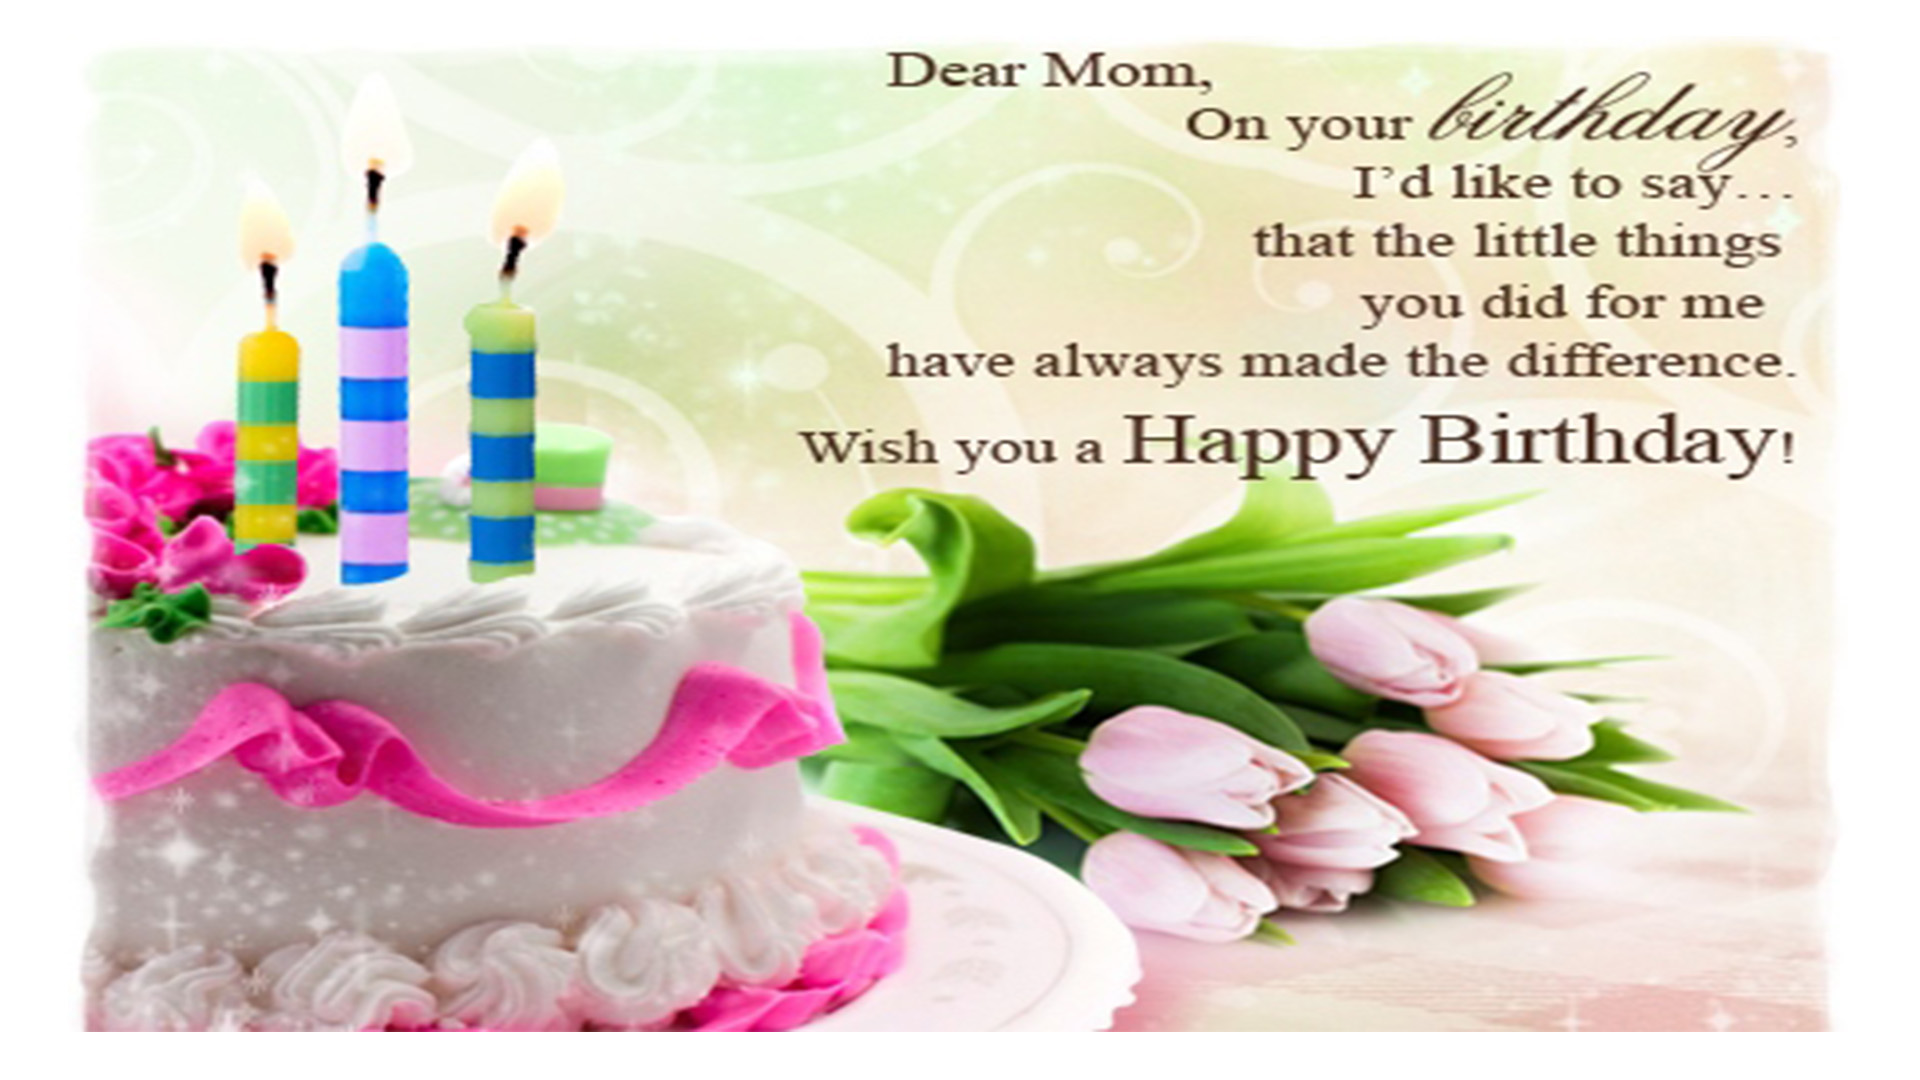 Happy Birthday Mom HD Images | Birthday Wishes for Mother